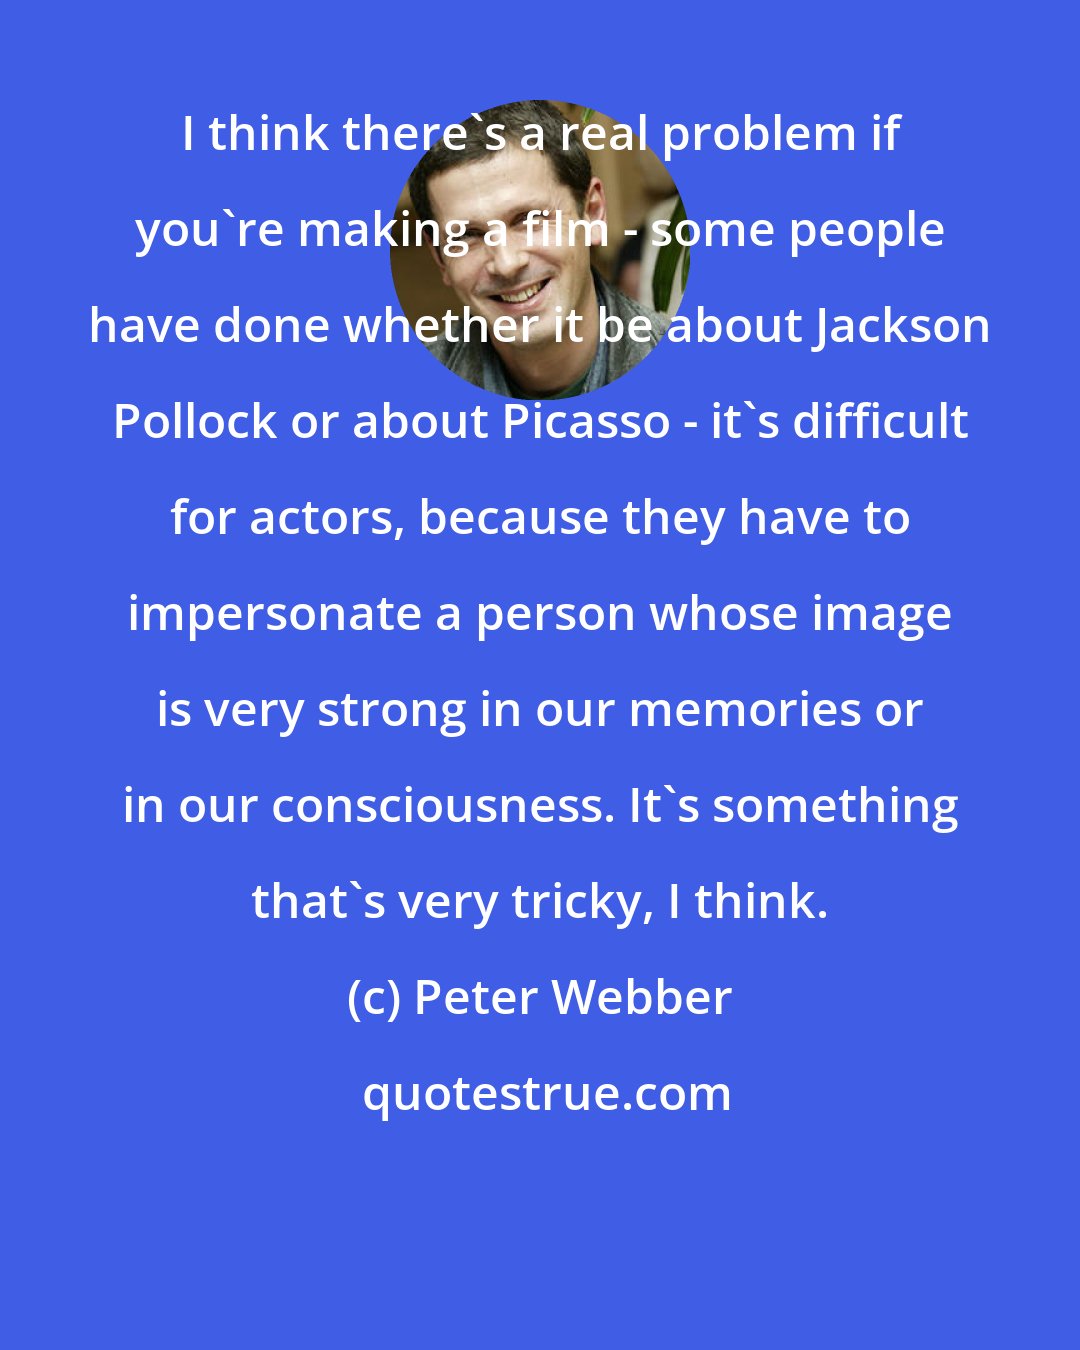 Peter Webber: I think there's a real problem if you're making a film - some people have done whether it be about Jackson Pollock or about Picasso - it's difficult for actors, because they have to impersonate a person whose image is very strong in our memories or in our consciousness. It's something that's very tricky, I think.